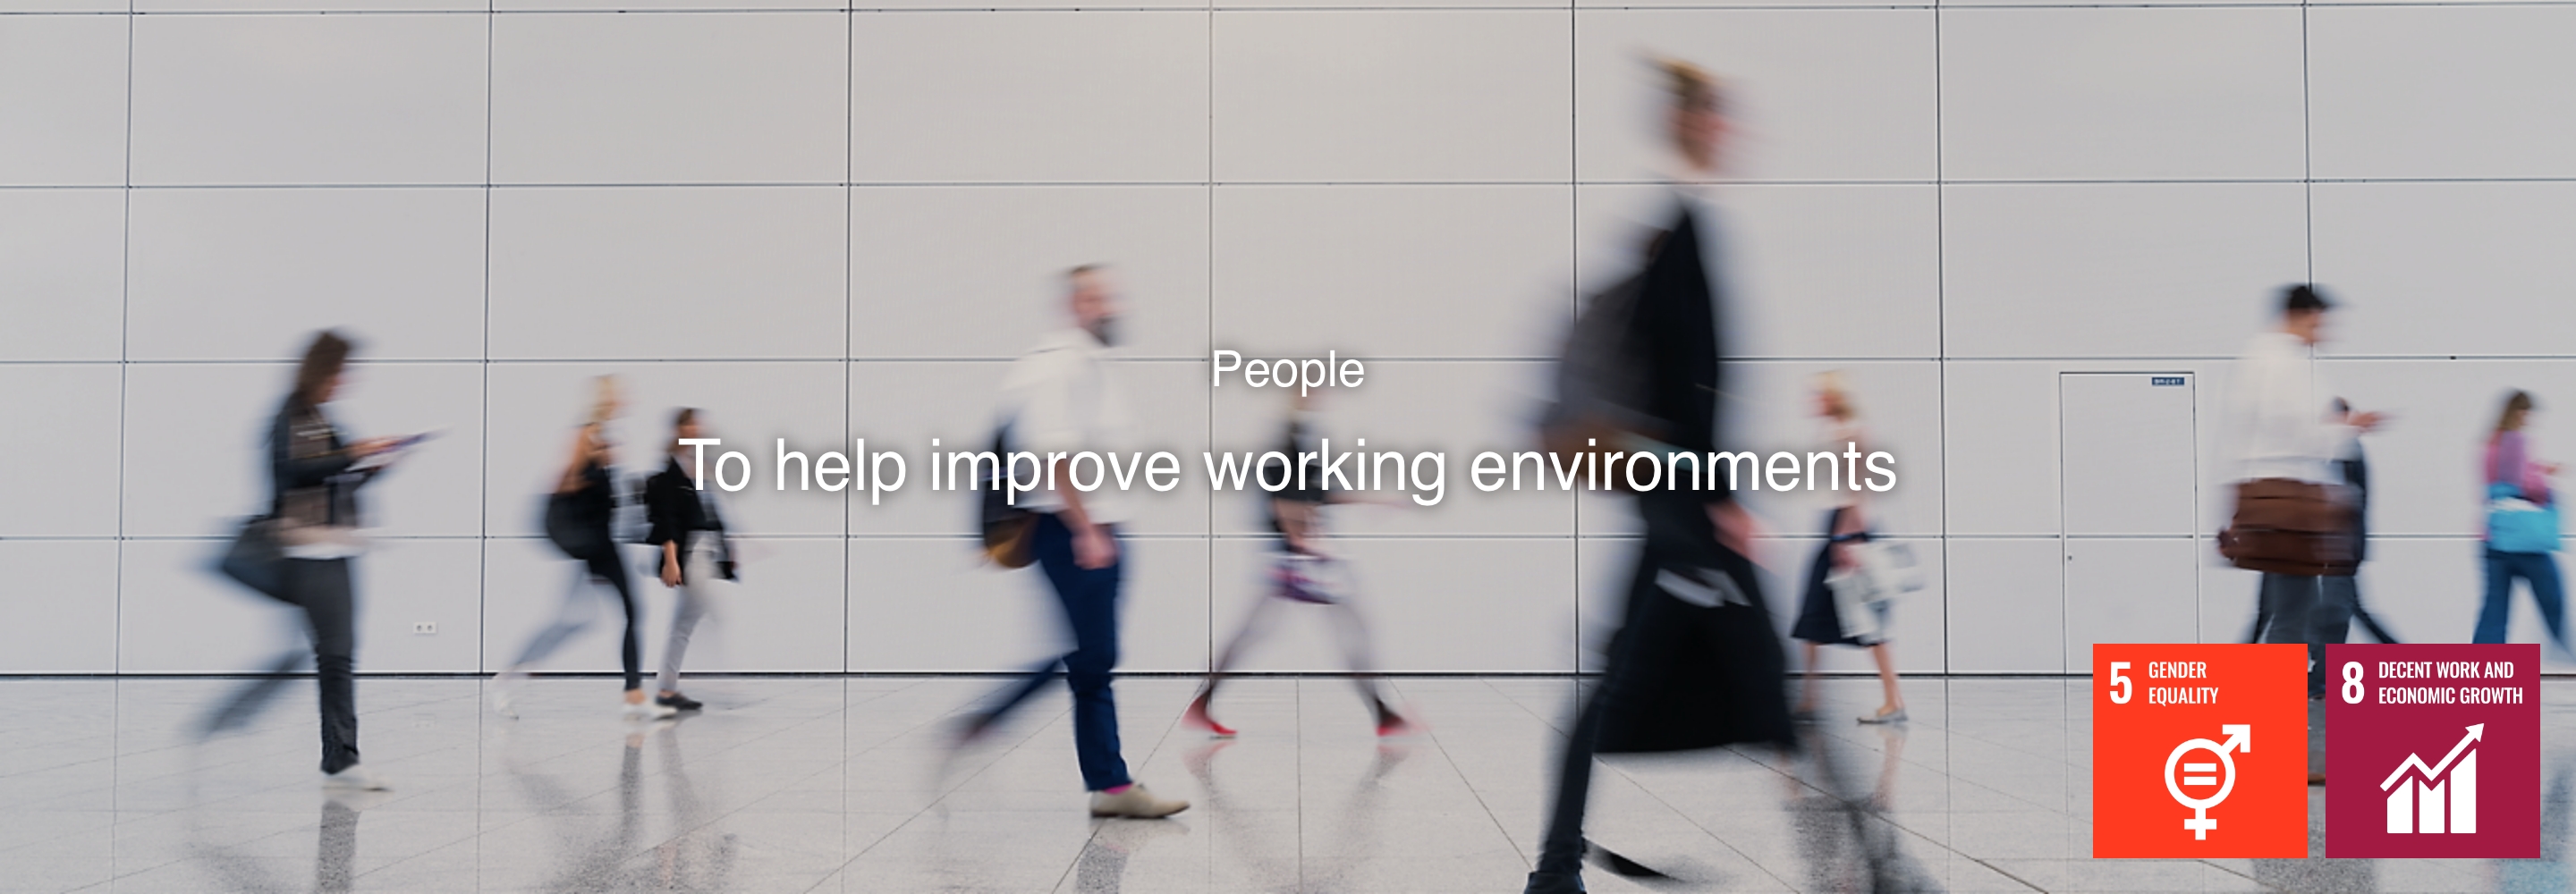 People To help improve working environments